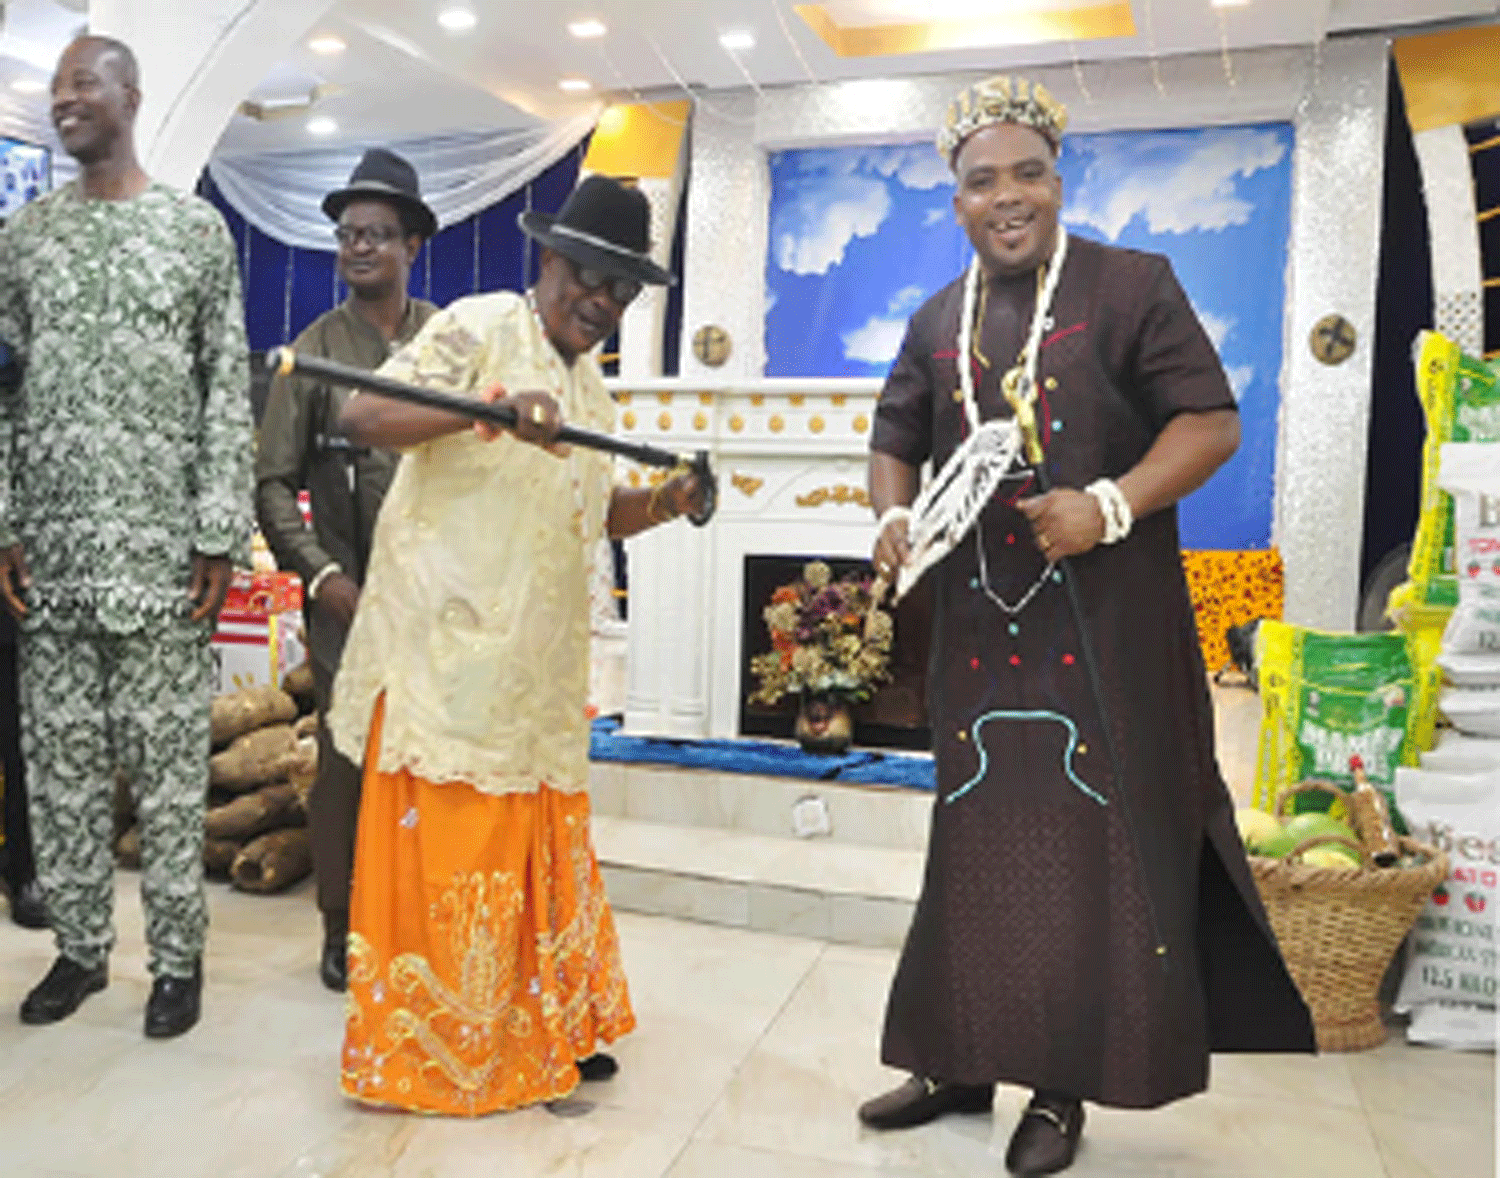 Celebrating Nigerian culture in the house of God